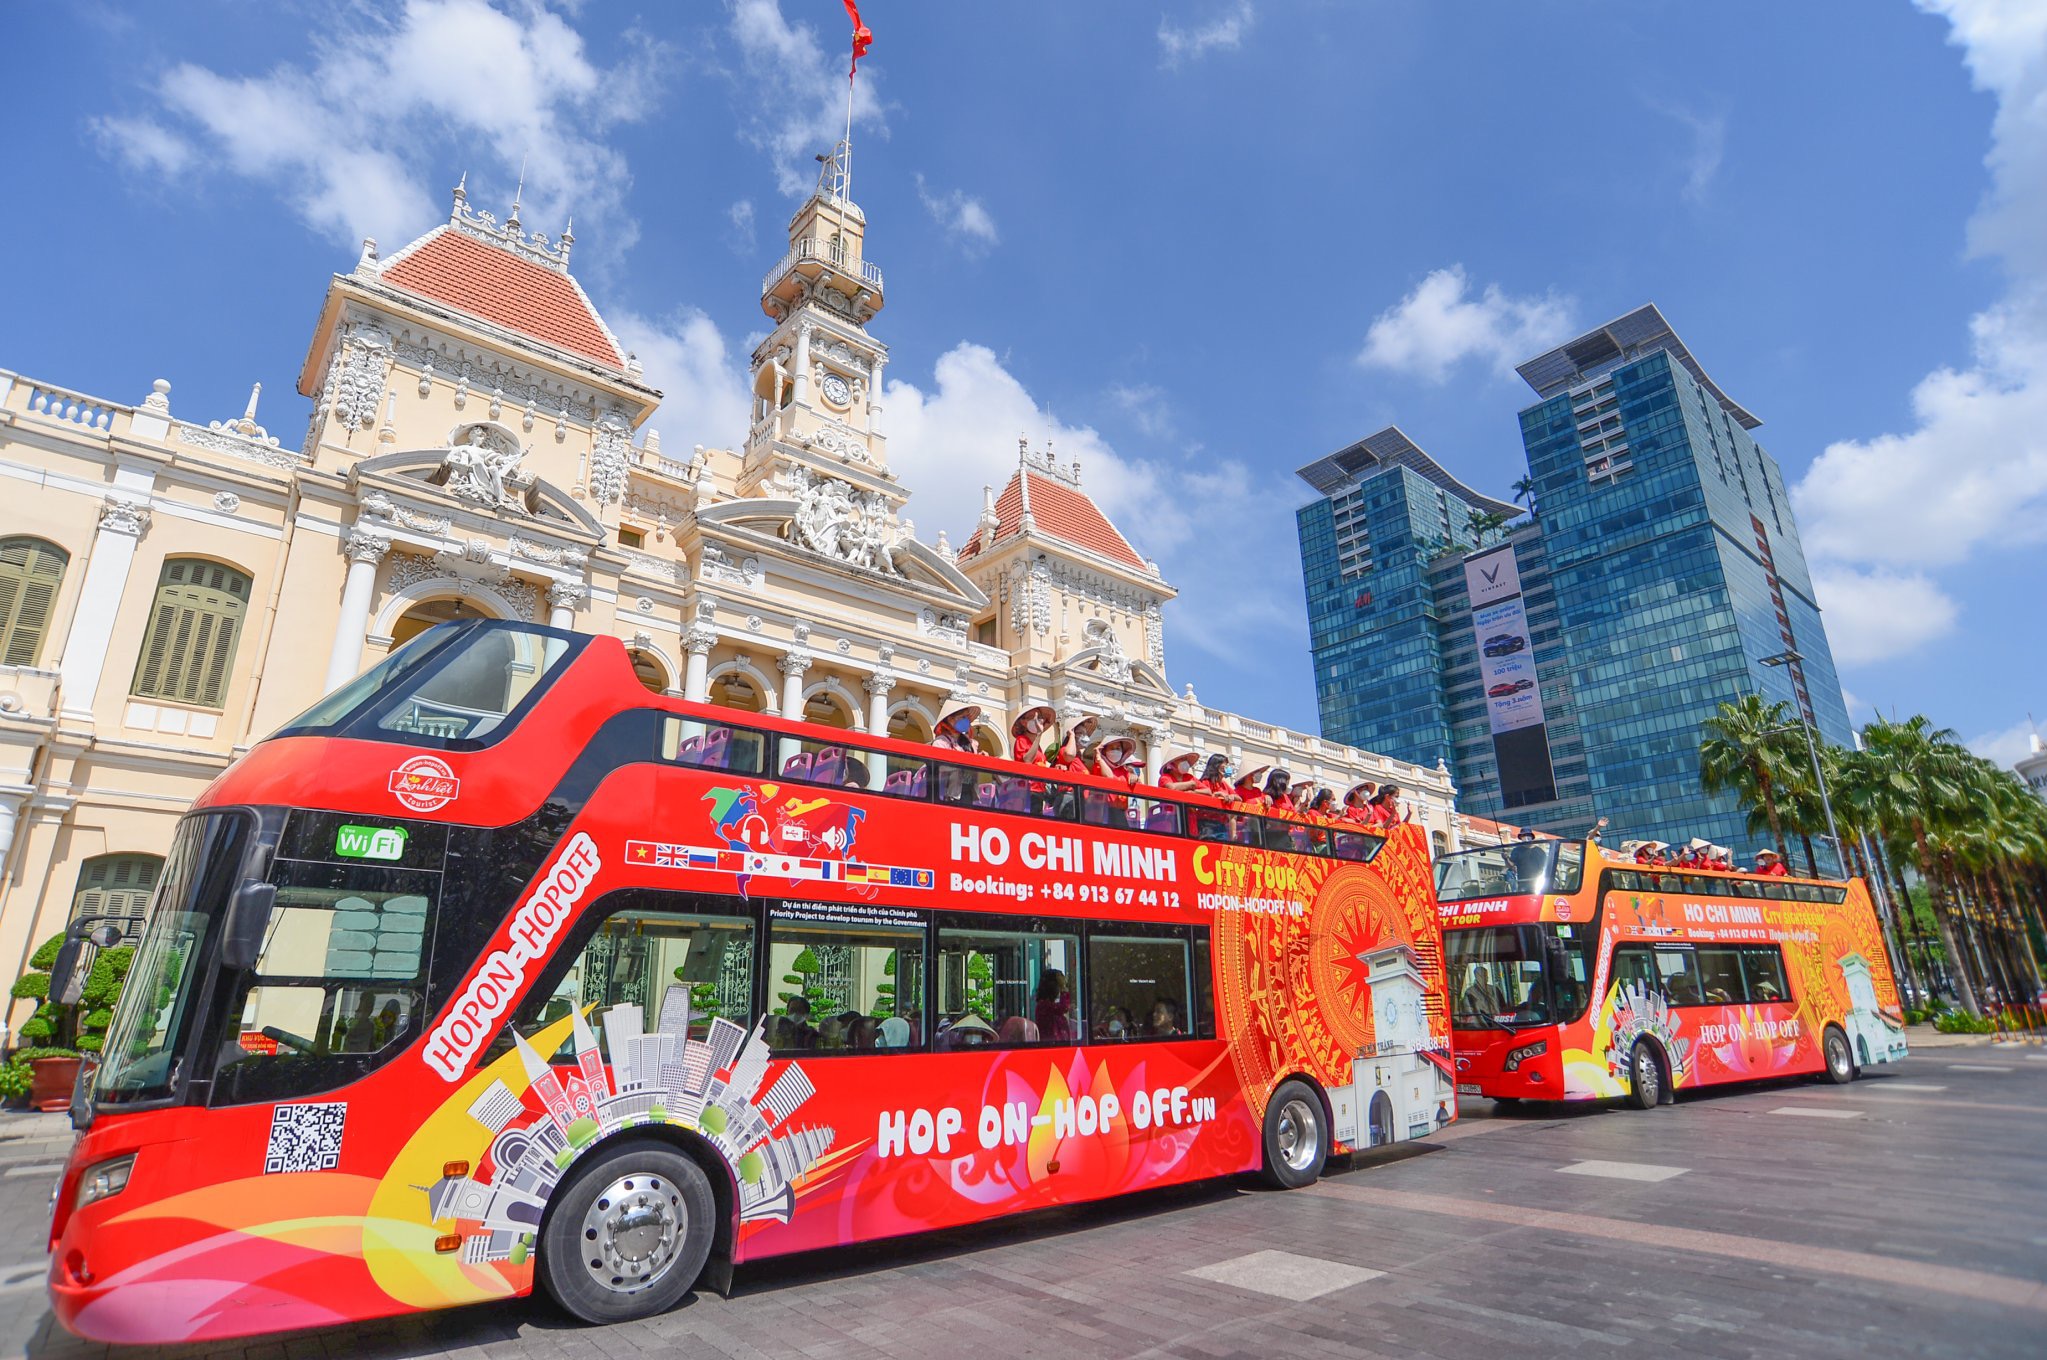 Tourists join an open-top double-decker bus tour in Ho Chi Minh City. Photo: Quang Dinh / Tuoi Tre News